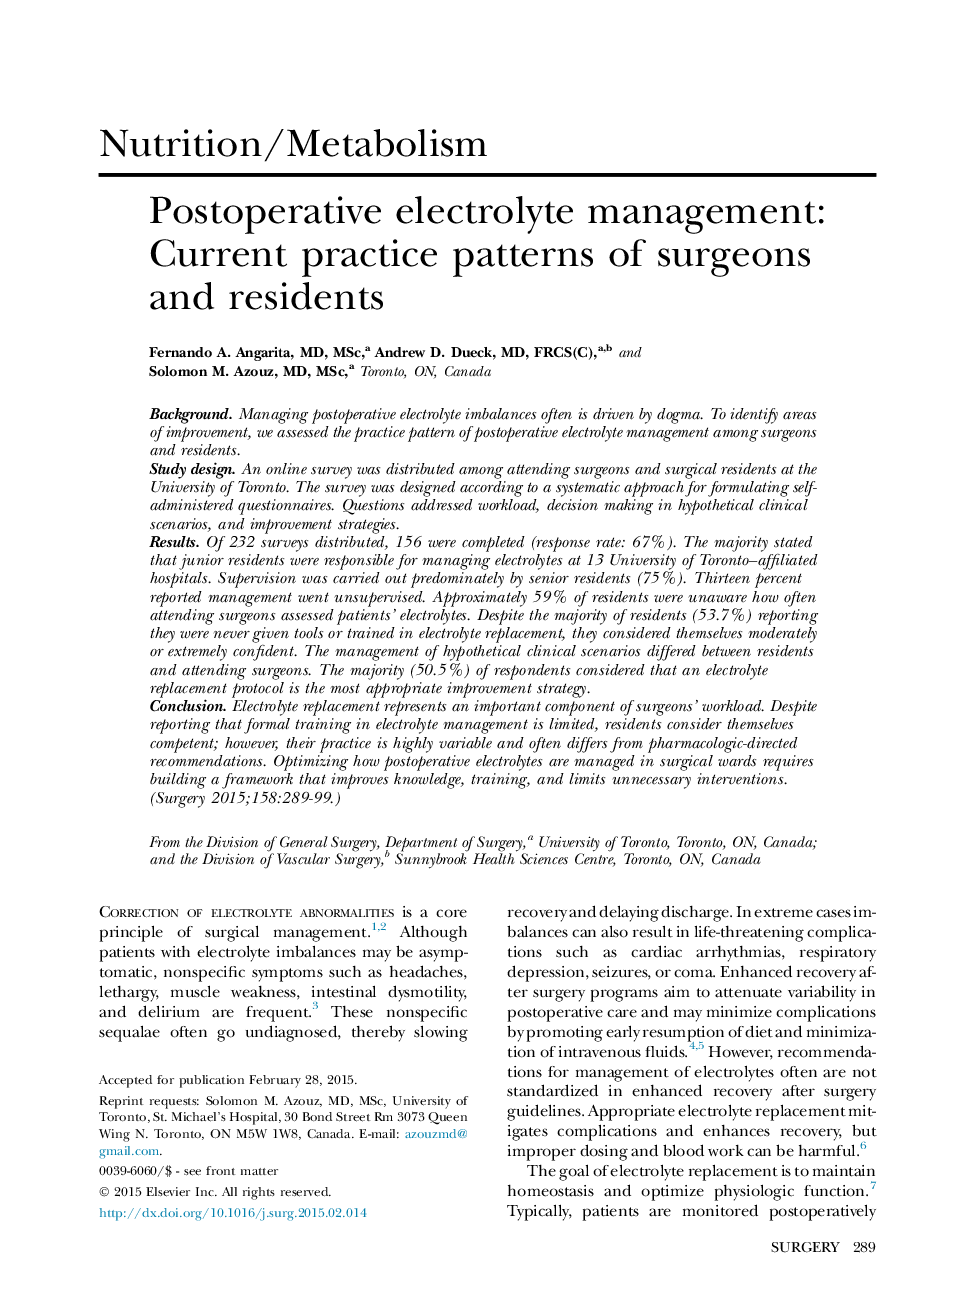 Nutrition/MetabolismPostoperative electrolyte management: Current practice patterns of surgeons and residents